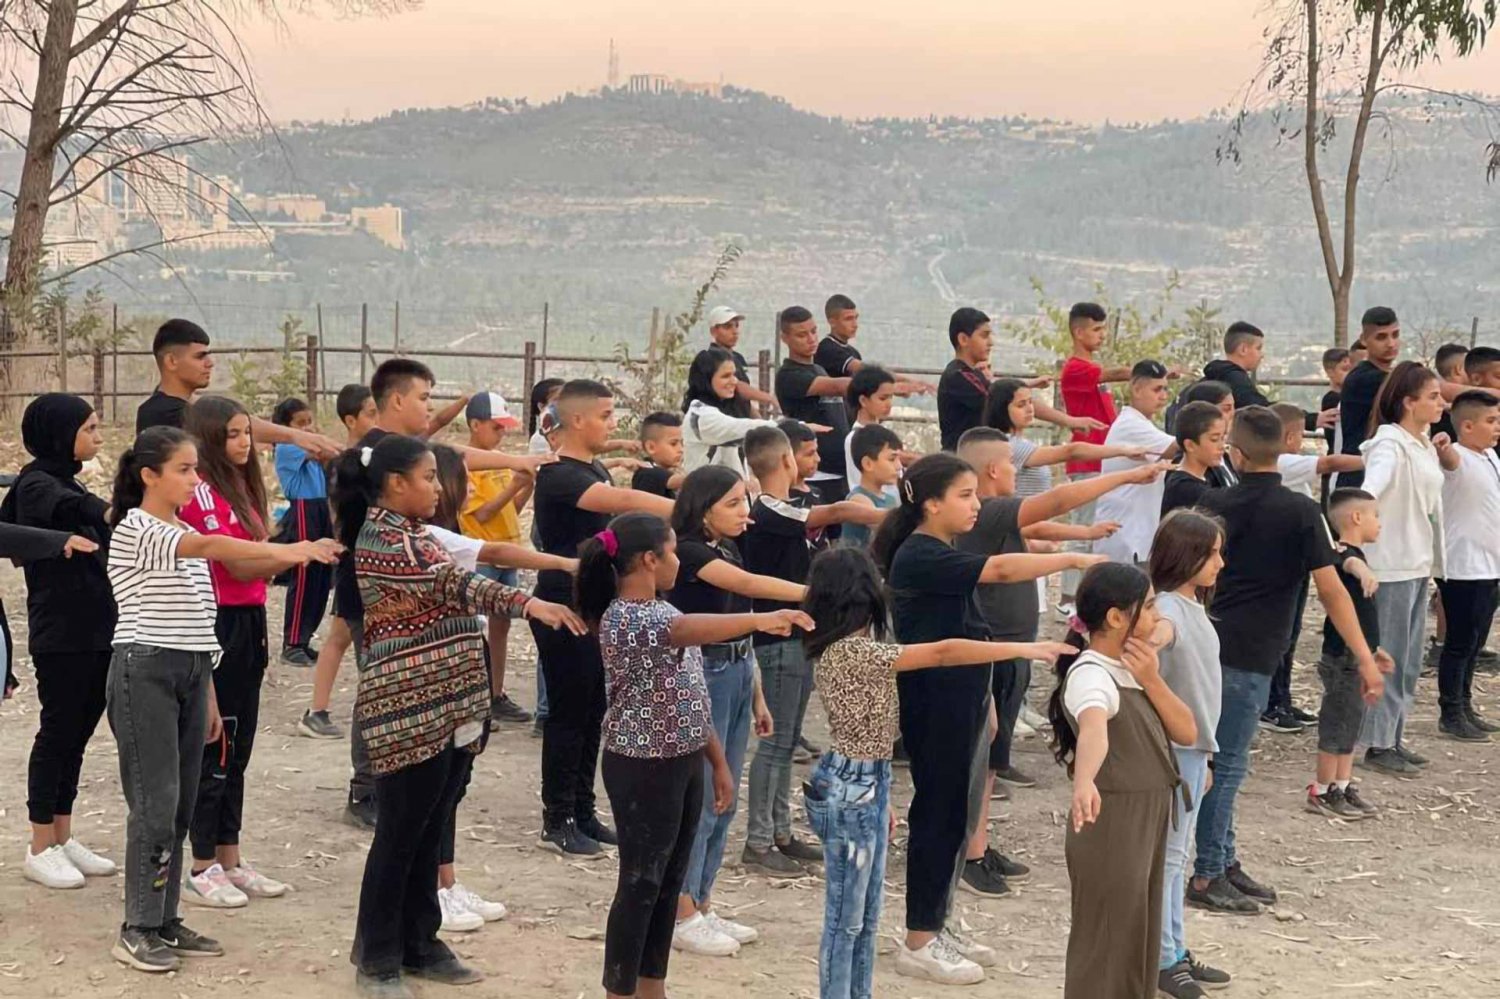 Campers during "Silwan Summer 2022," a youth camp for the al-Bustan district scout group